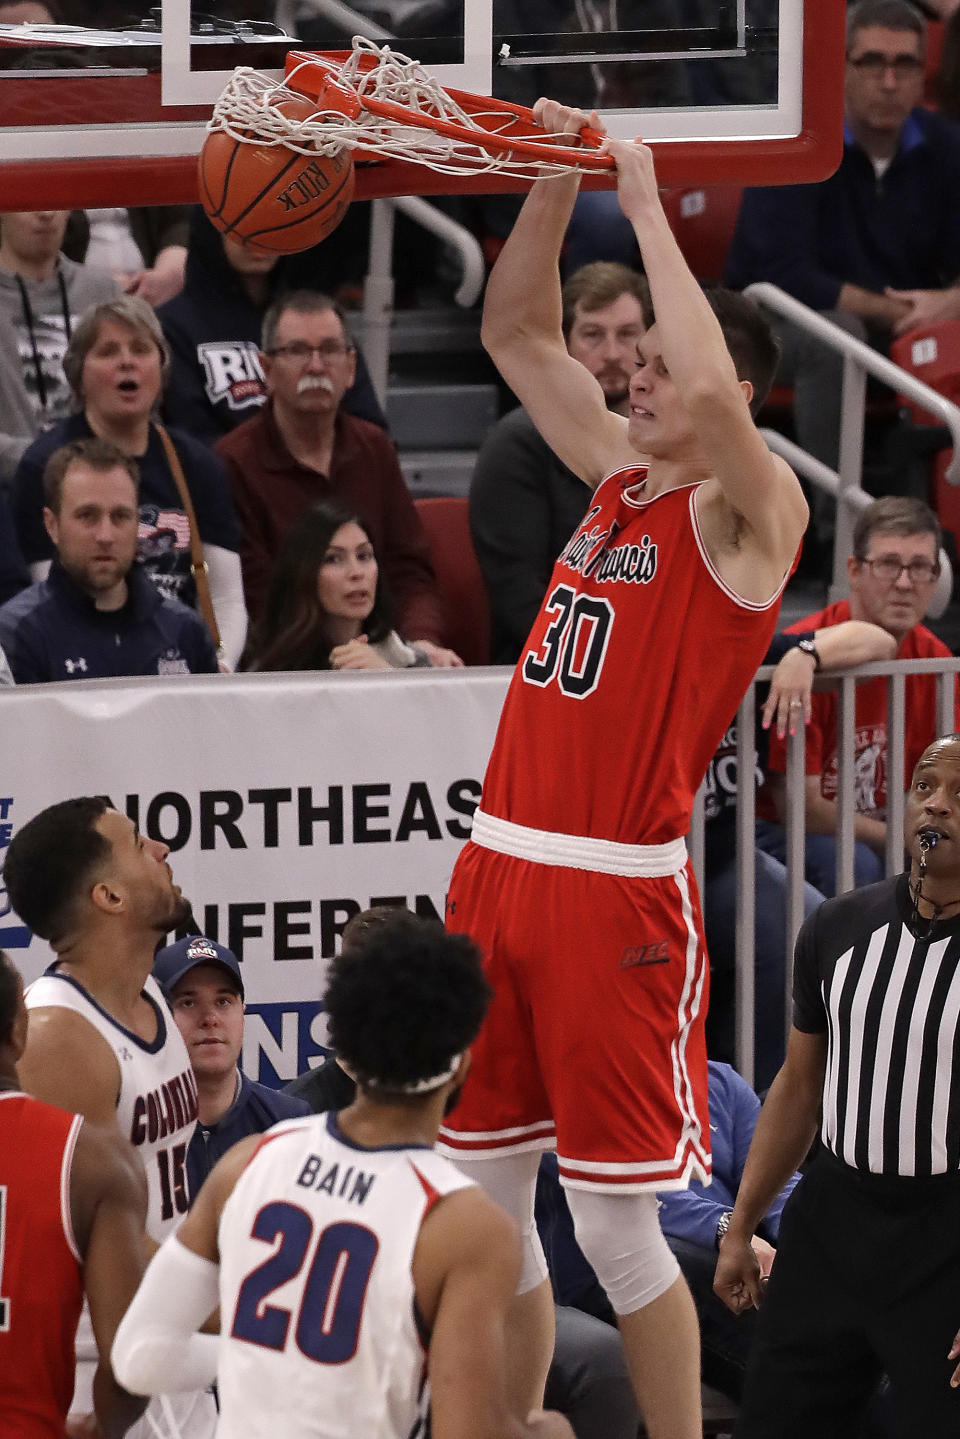 St. Francis' Deivydas Kuzavas (30) dunks during the first half against Robert Morris during an NCAA college basketball game for the Northeast Conference men's tournament championship in Pittsburgh, Tuesday, March 10, 2020. (AP Photo/Gene J. Puskar)